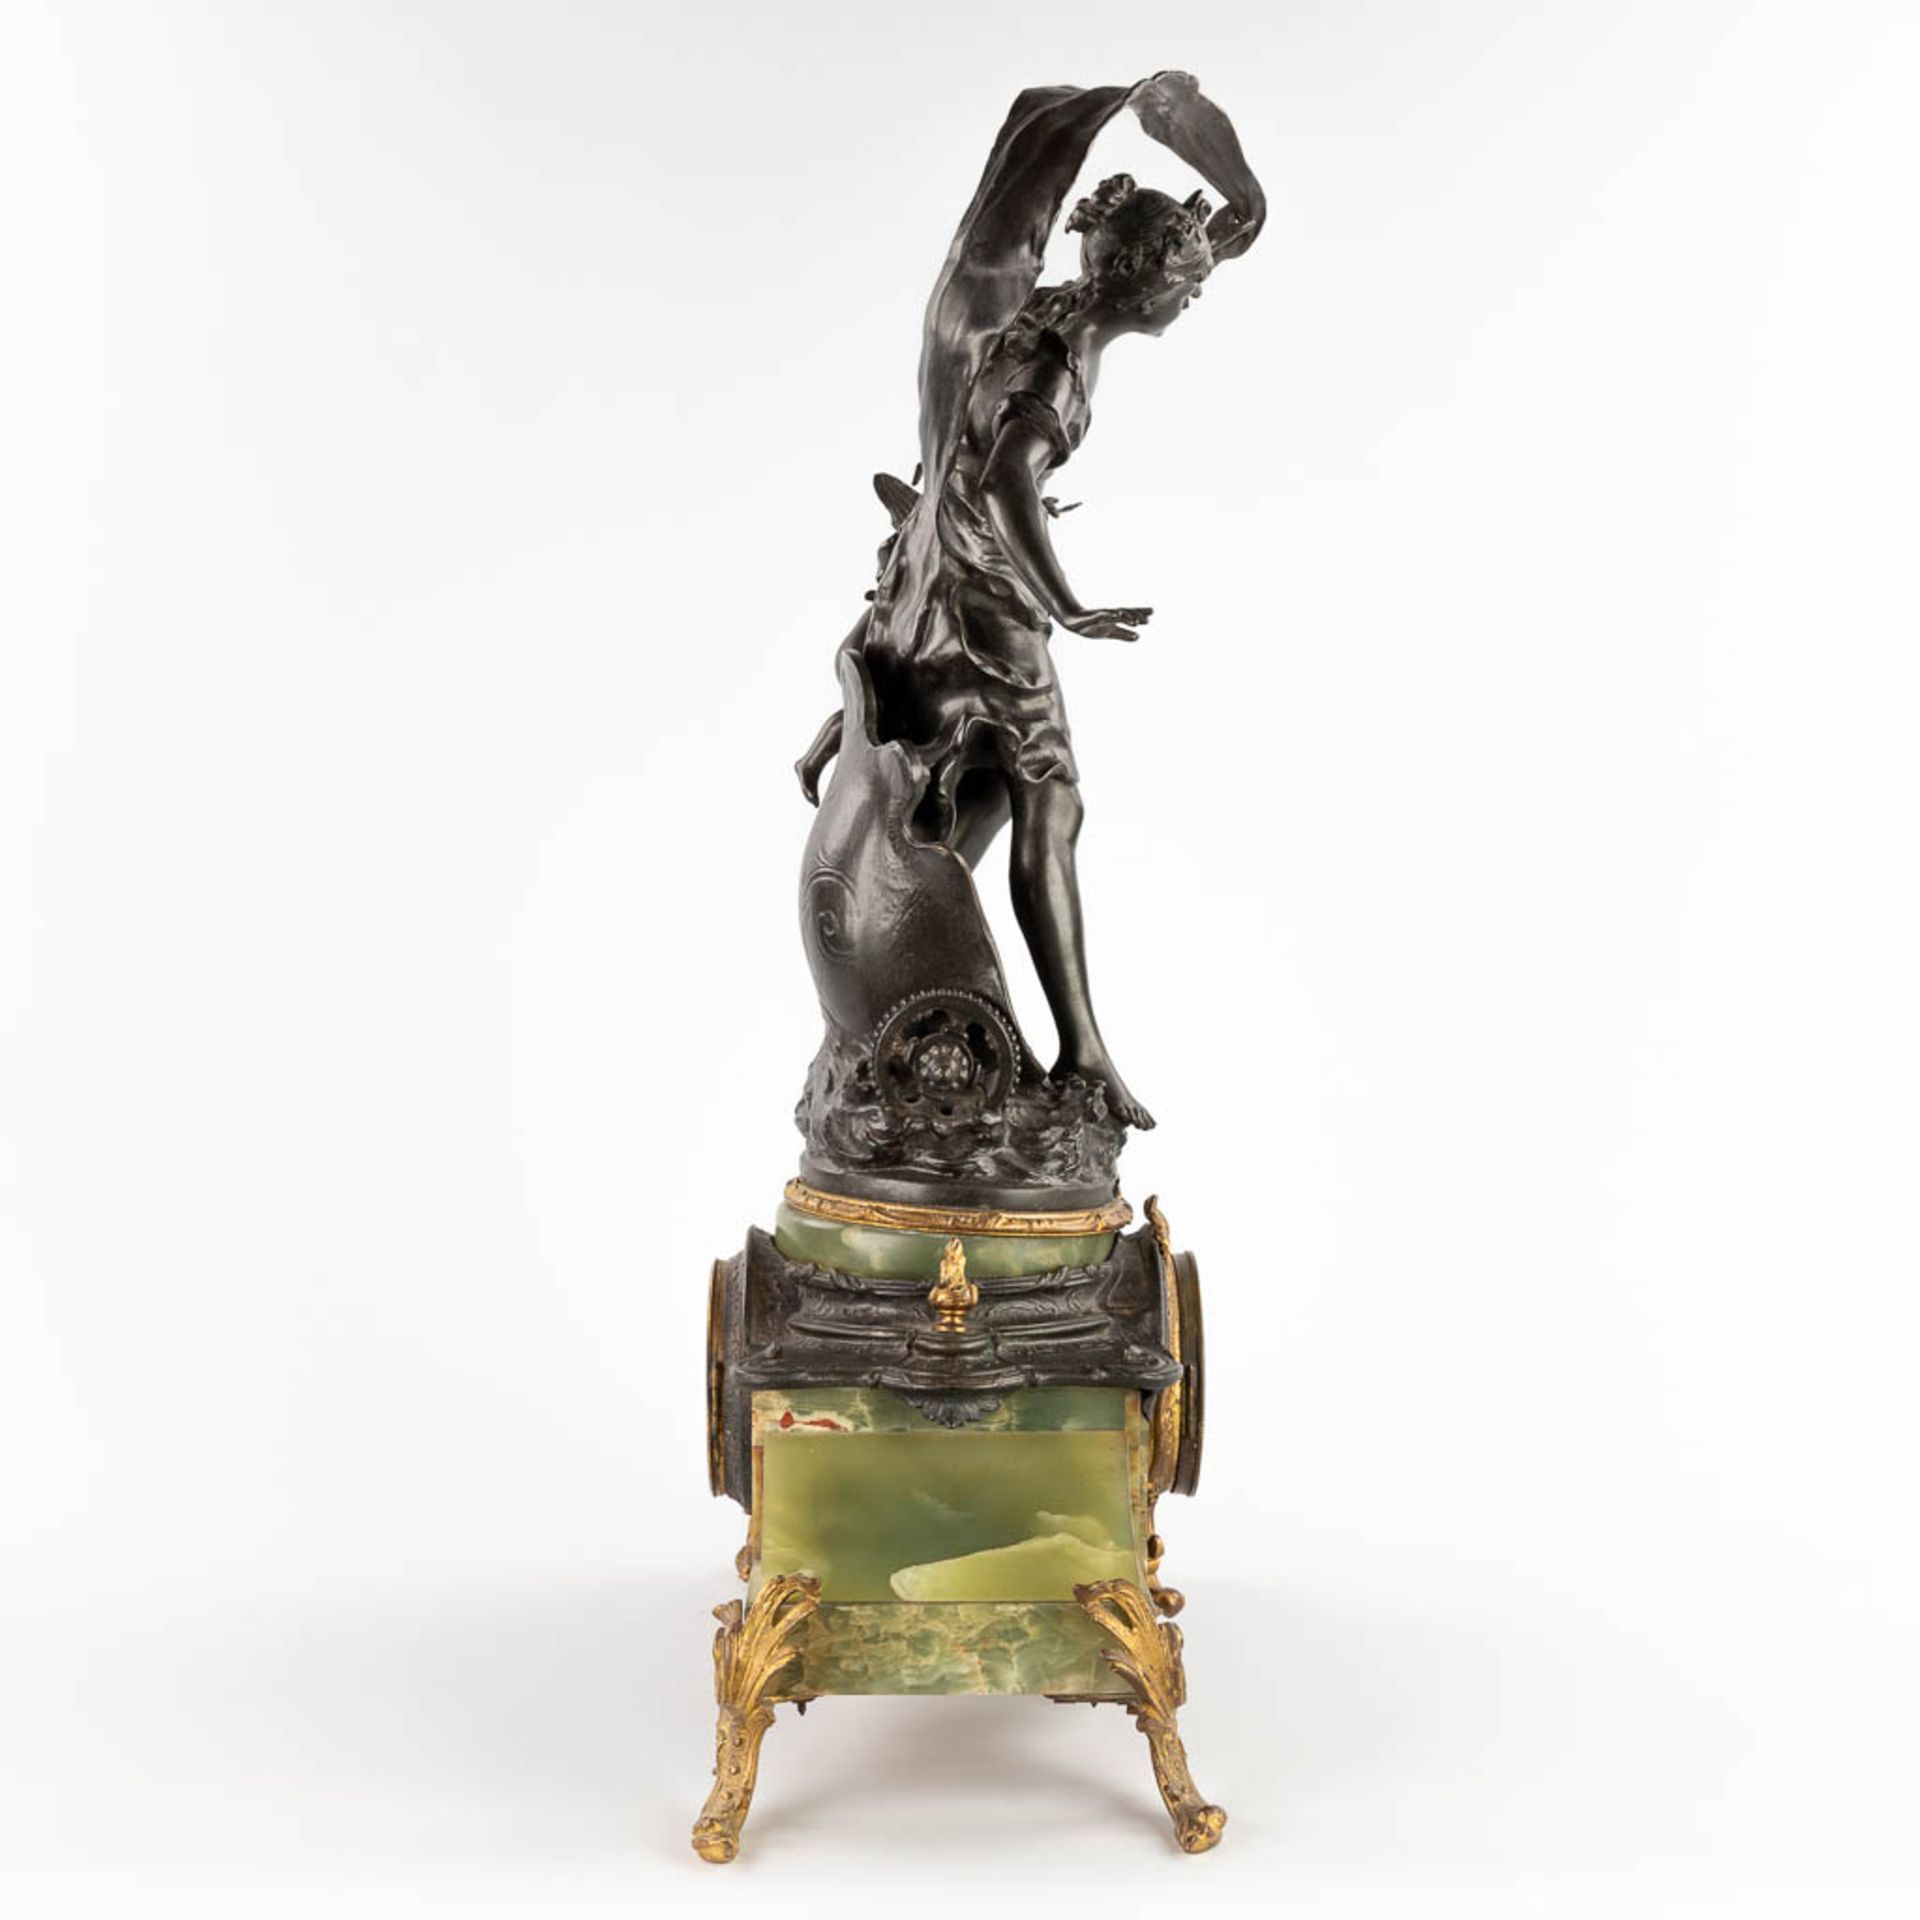 Auguste MOREAU (1834-1917) A mantle clock, spelter on green onyx, 19th C. (D:21 x W:44 x H:63 cm) - Image 10 of 19